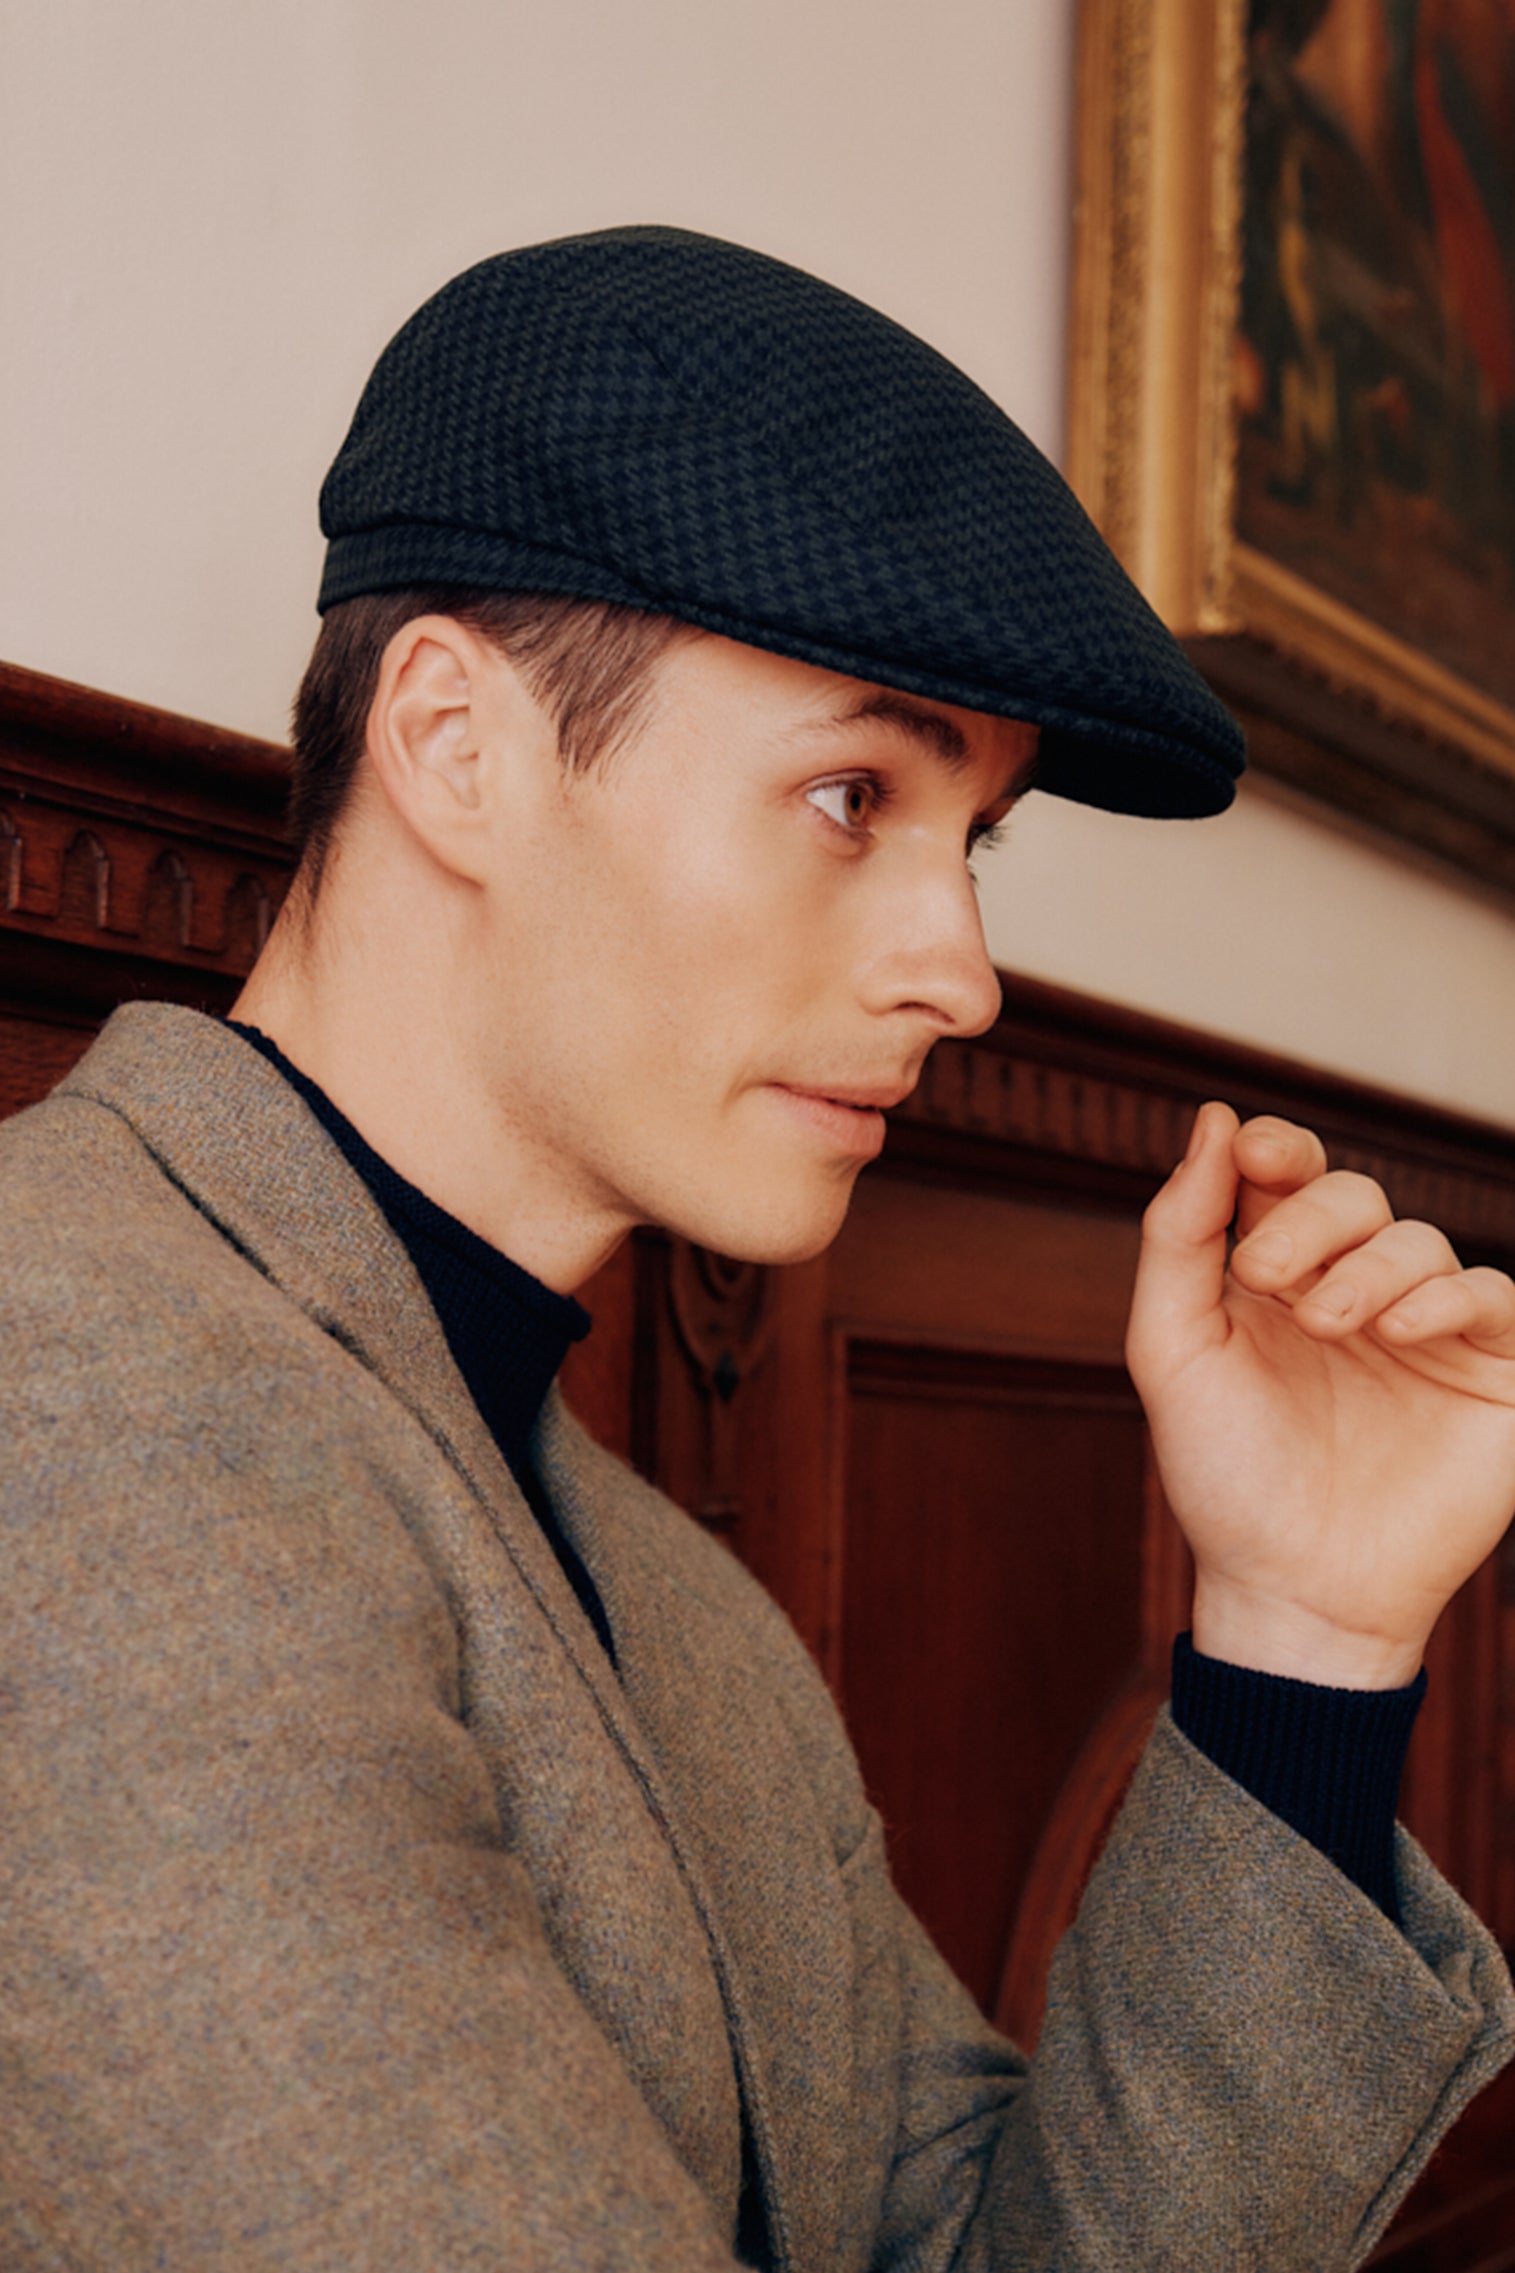 Grosvenor Houndstooth Flat Cap - Hats for Oval Face Shapes - Lock & Co. Hatters London UK